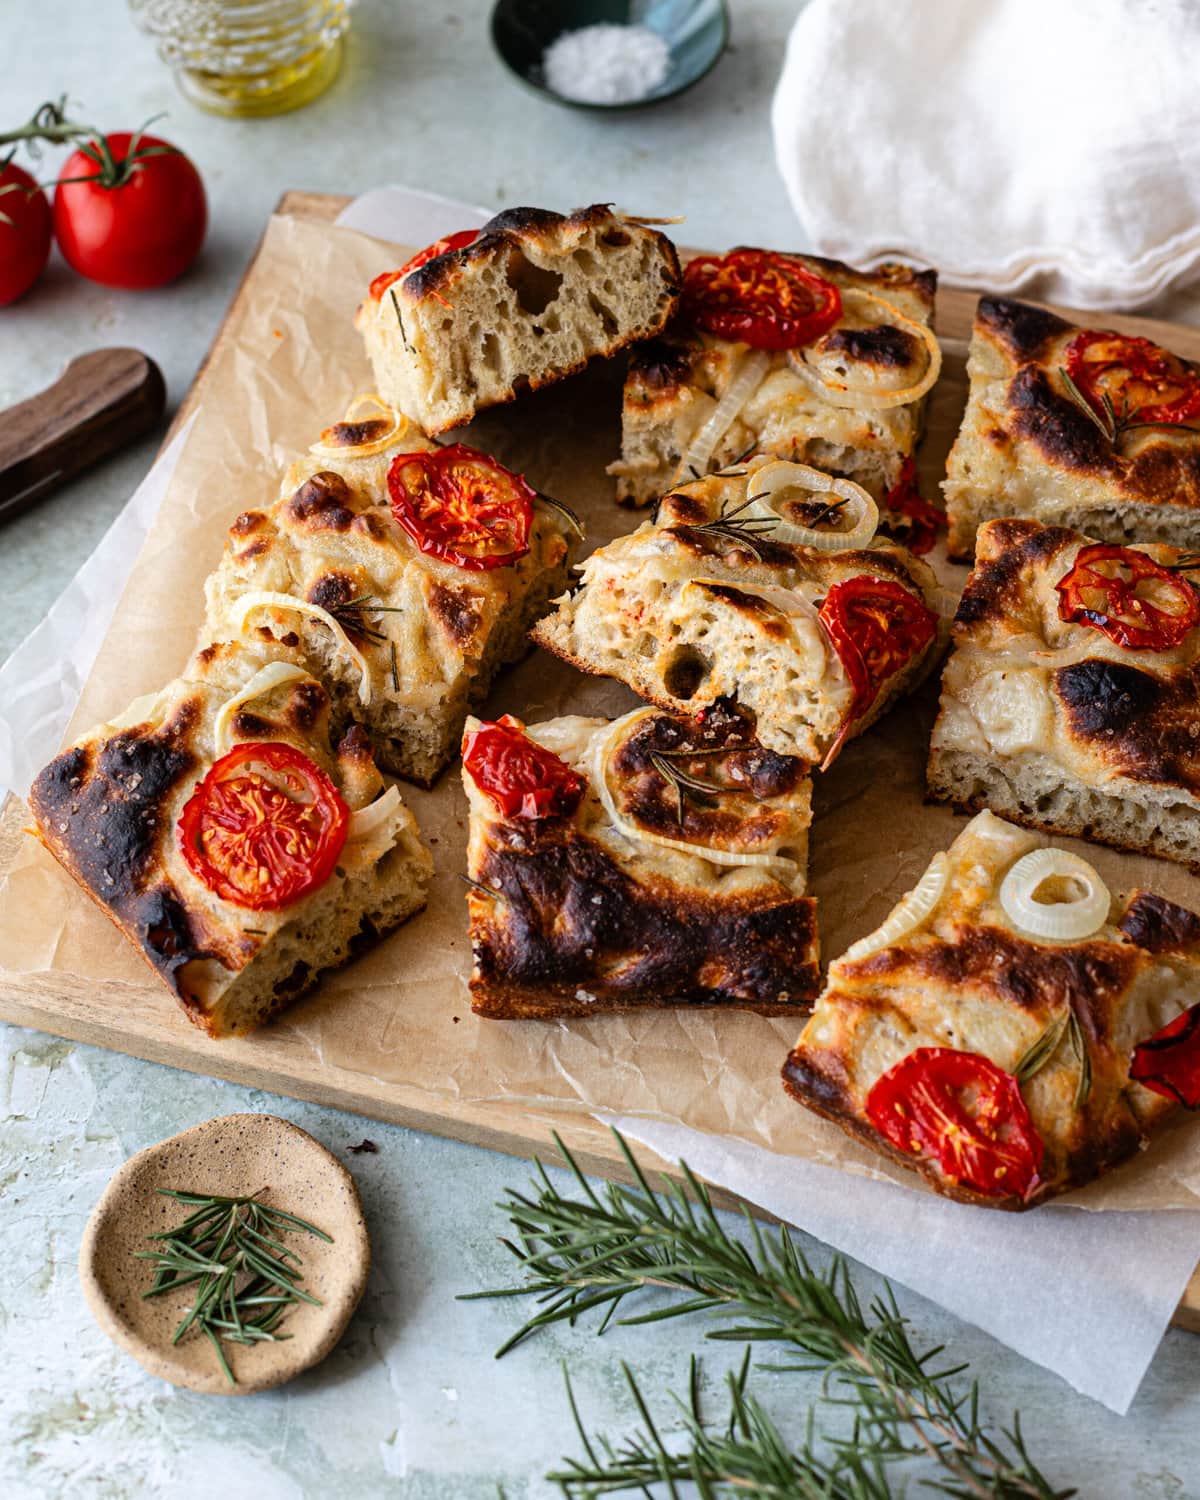 A whole focaccia topped with onions and tomatoes sliced into squares on a parchment-lined cutting board.